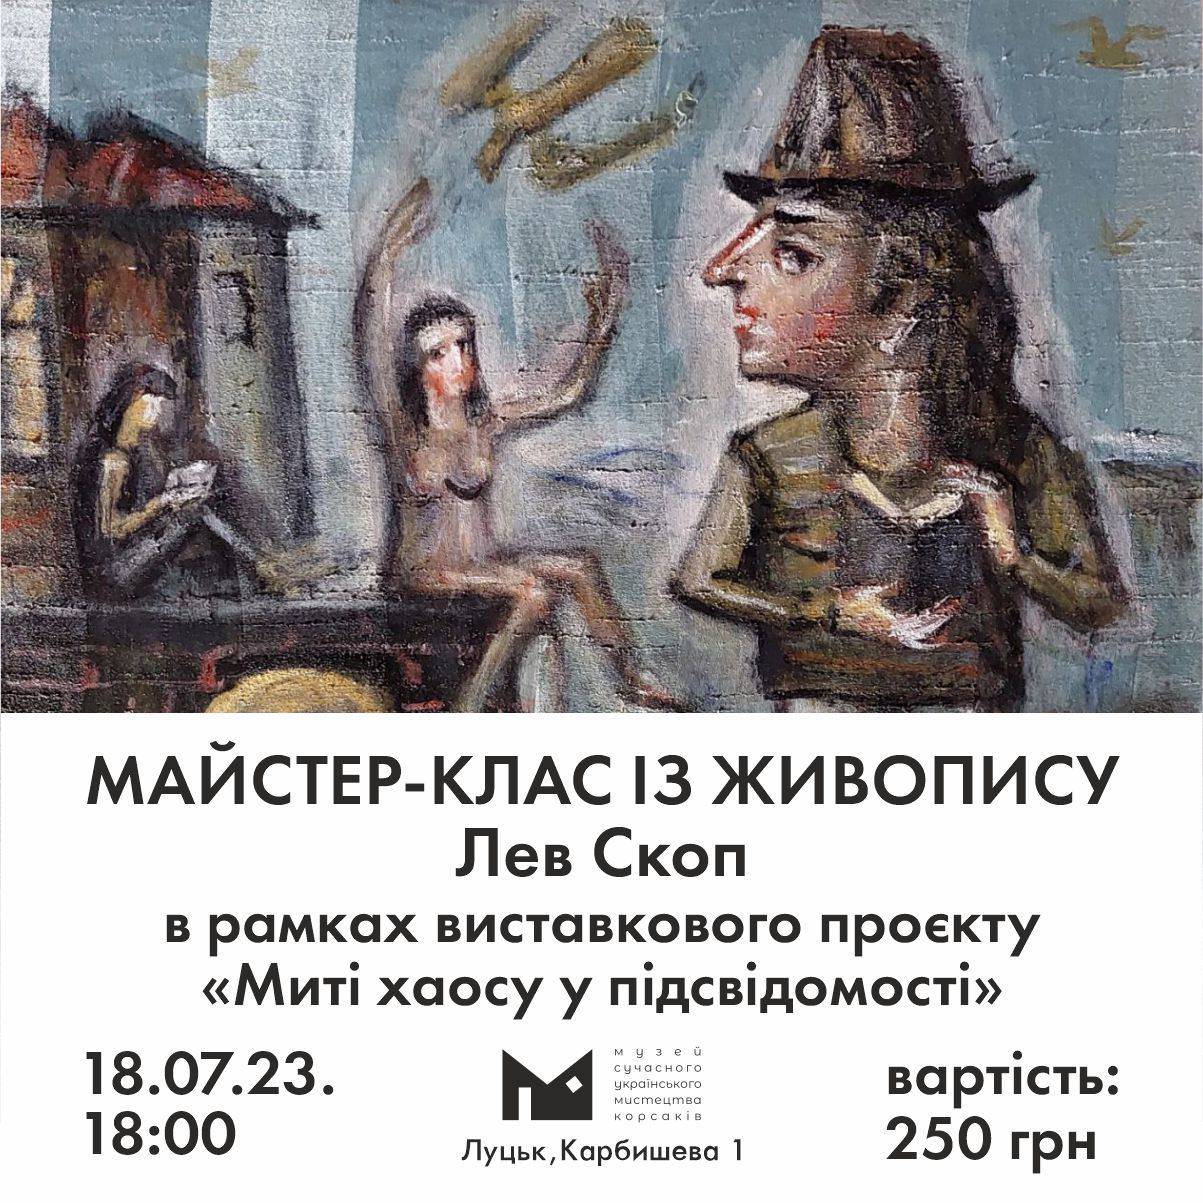 On July 18 at 6:00 p.m., a painting master class by Lev Skop will be held at the Korsaks` Museum of Modern Ukrainian Art